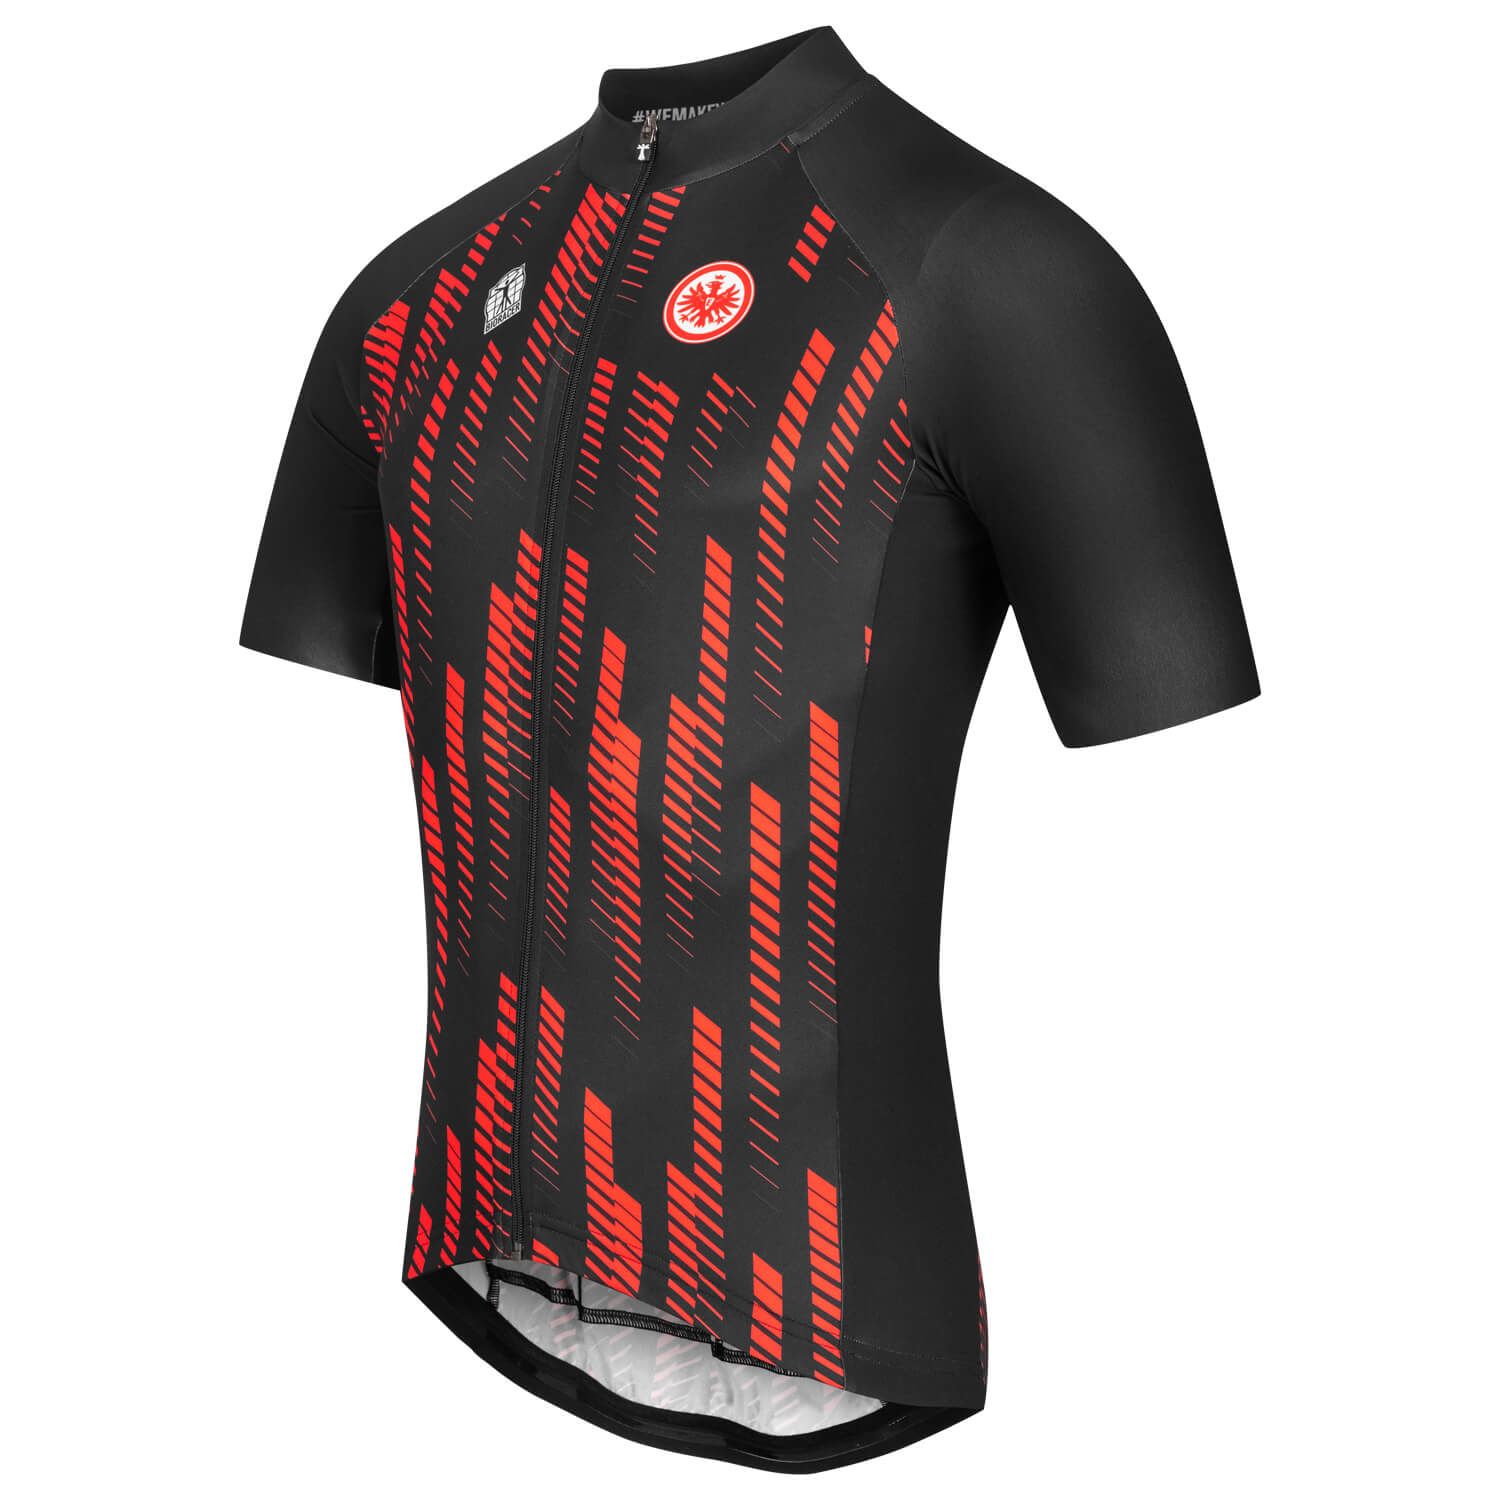 Bild 3: Cycling Jersey Red Style 